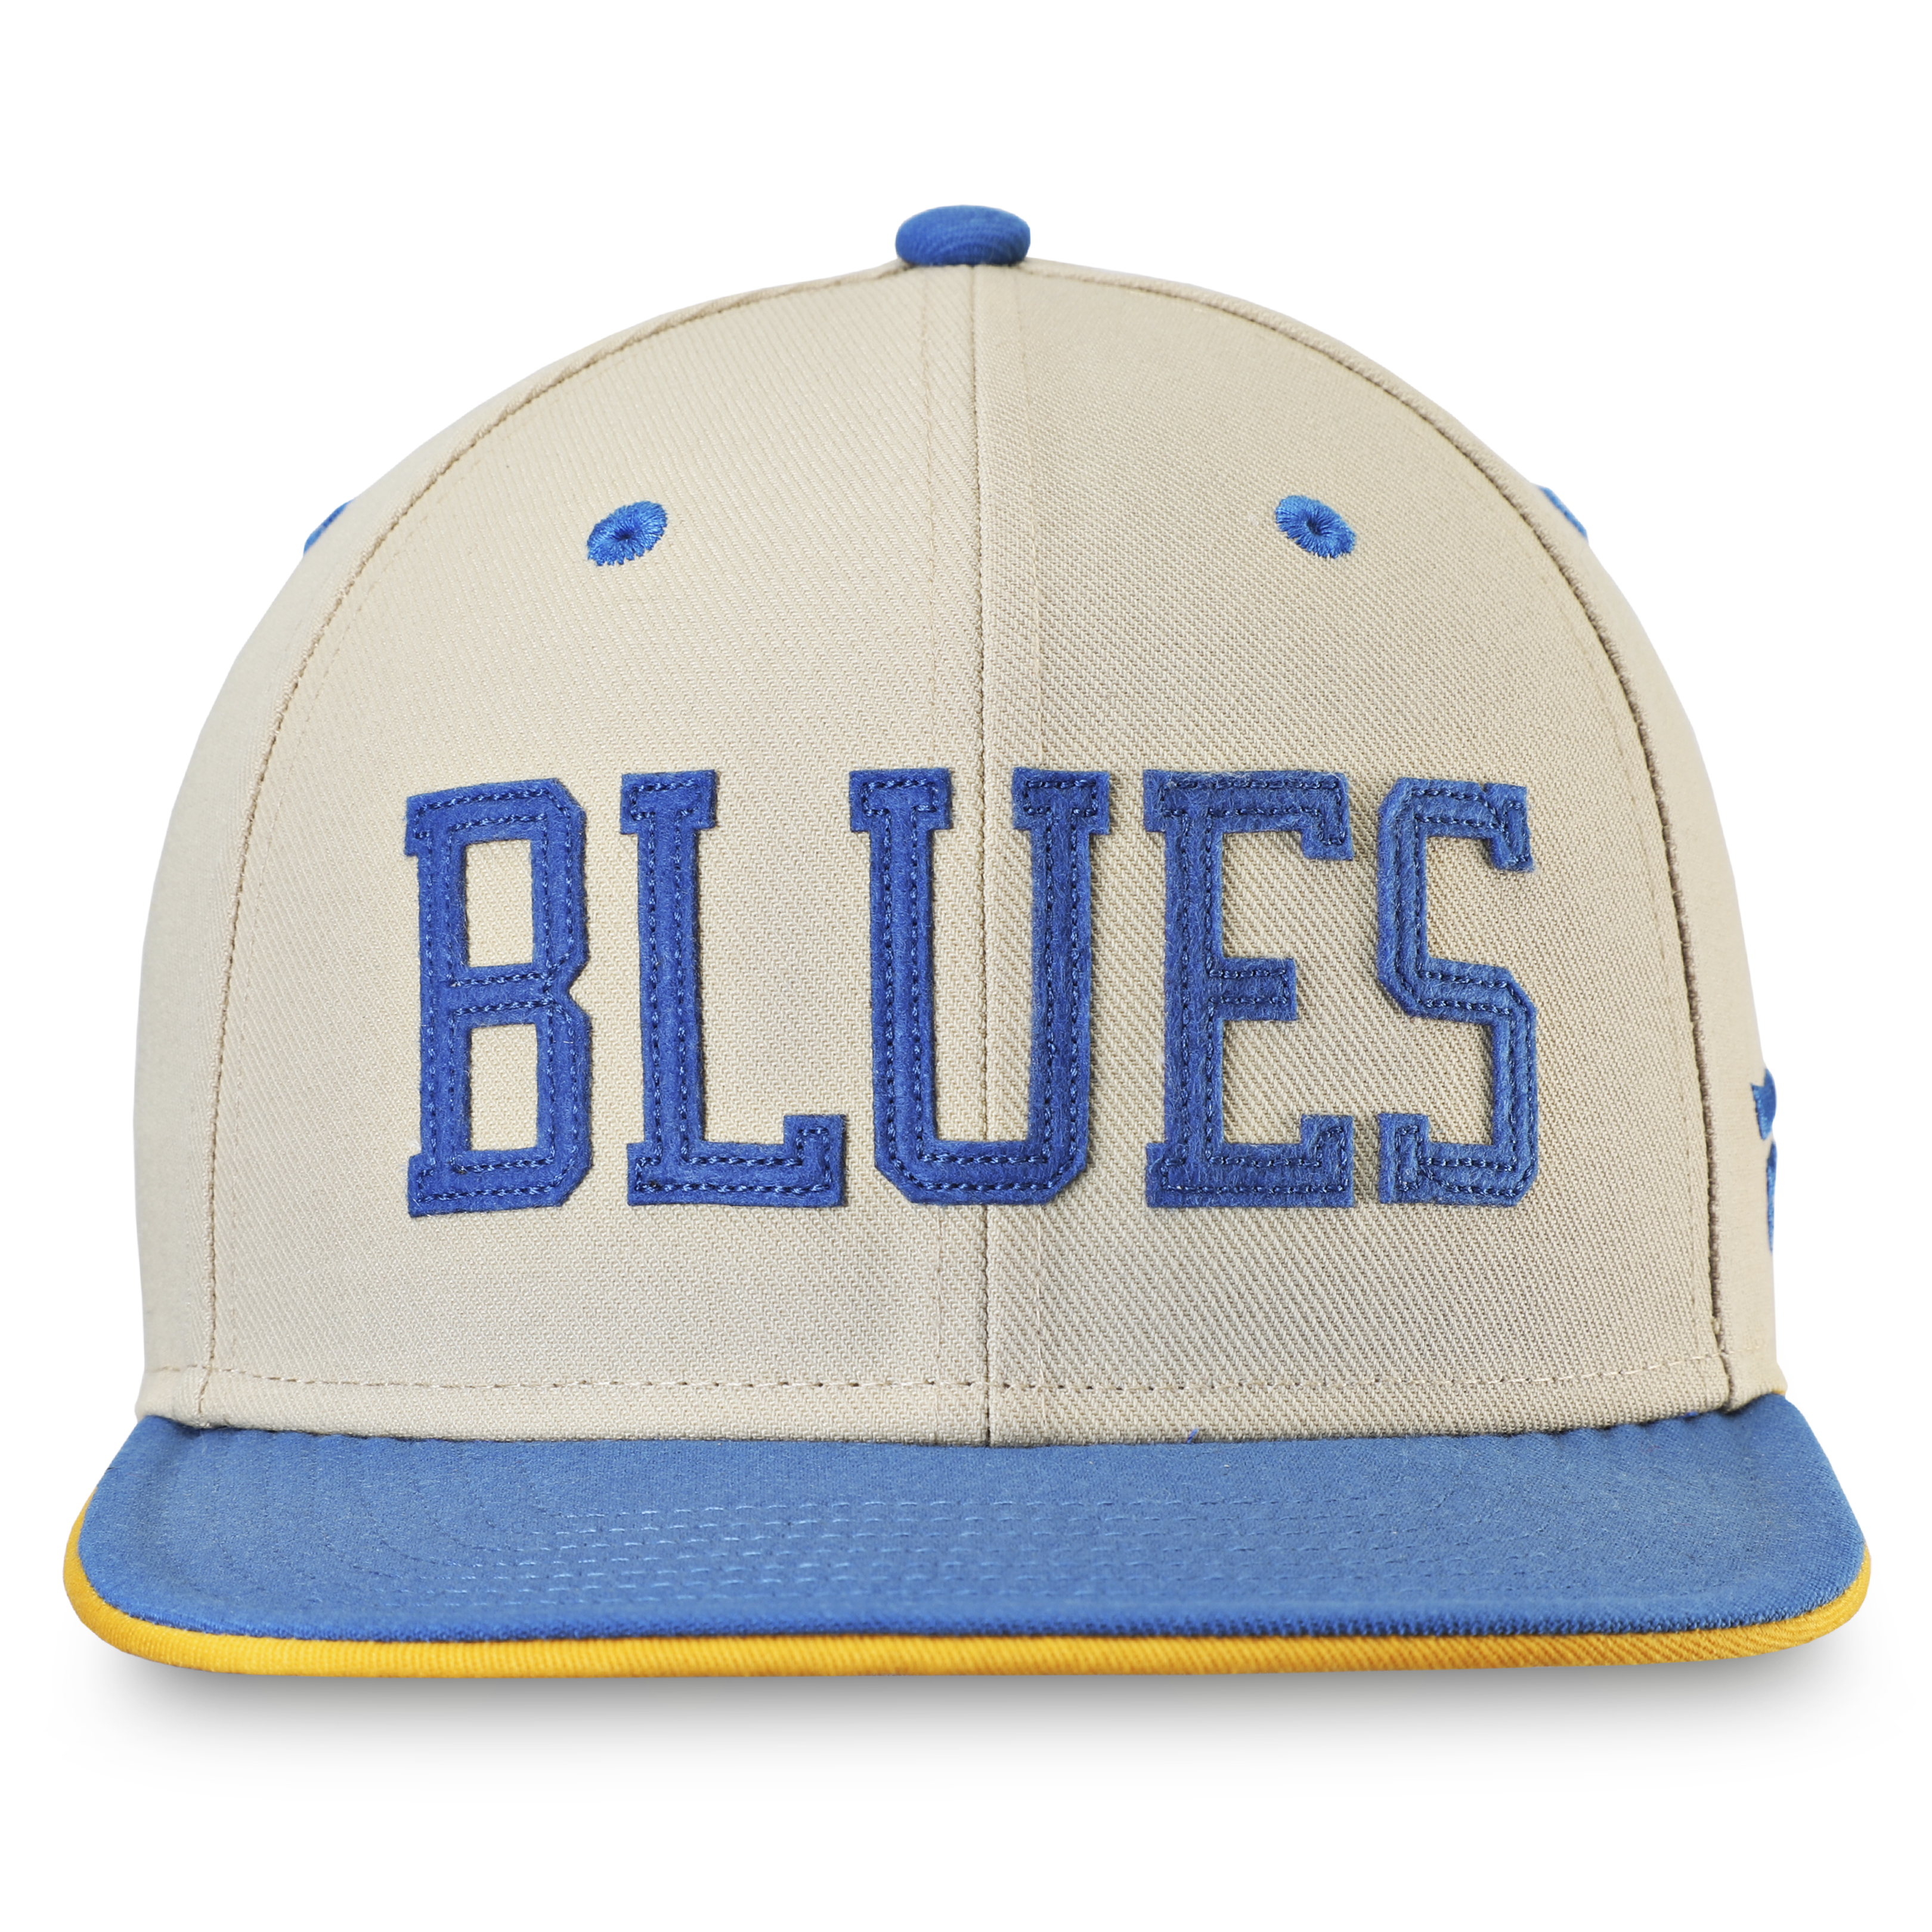 St. Louis Blues Fanatics Branded Special Edition Snapback Adjustable Hat -  Red